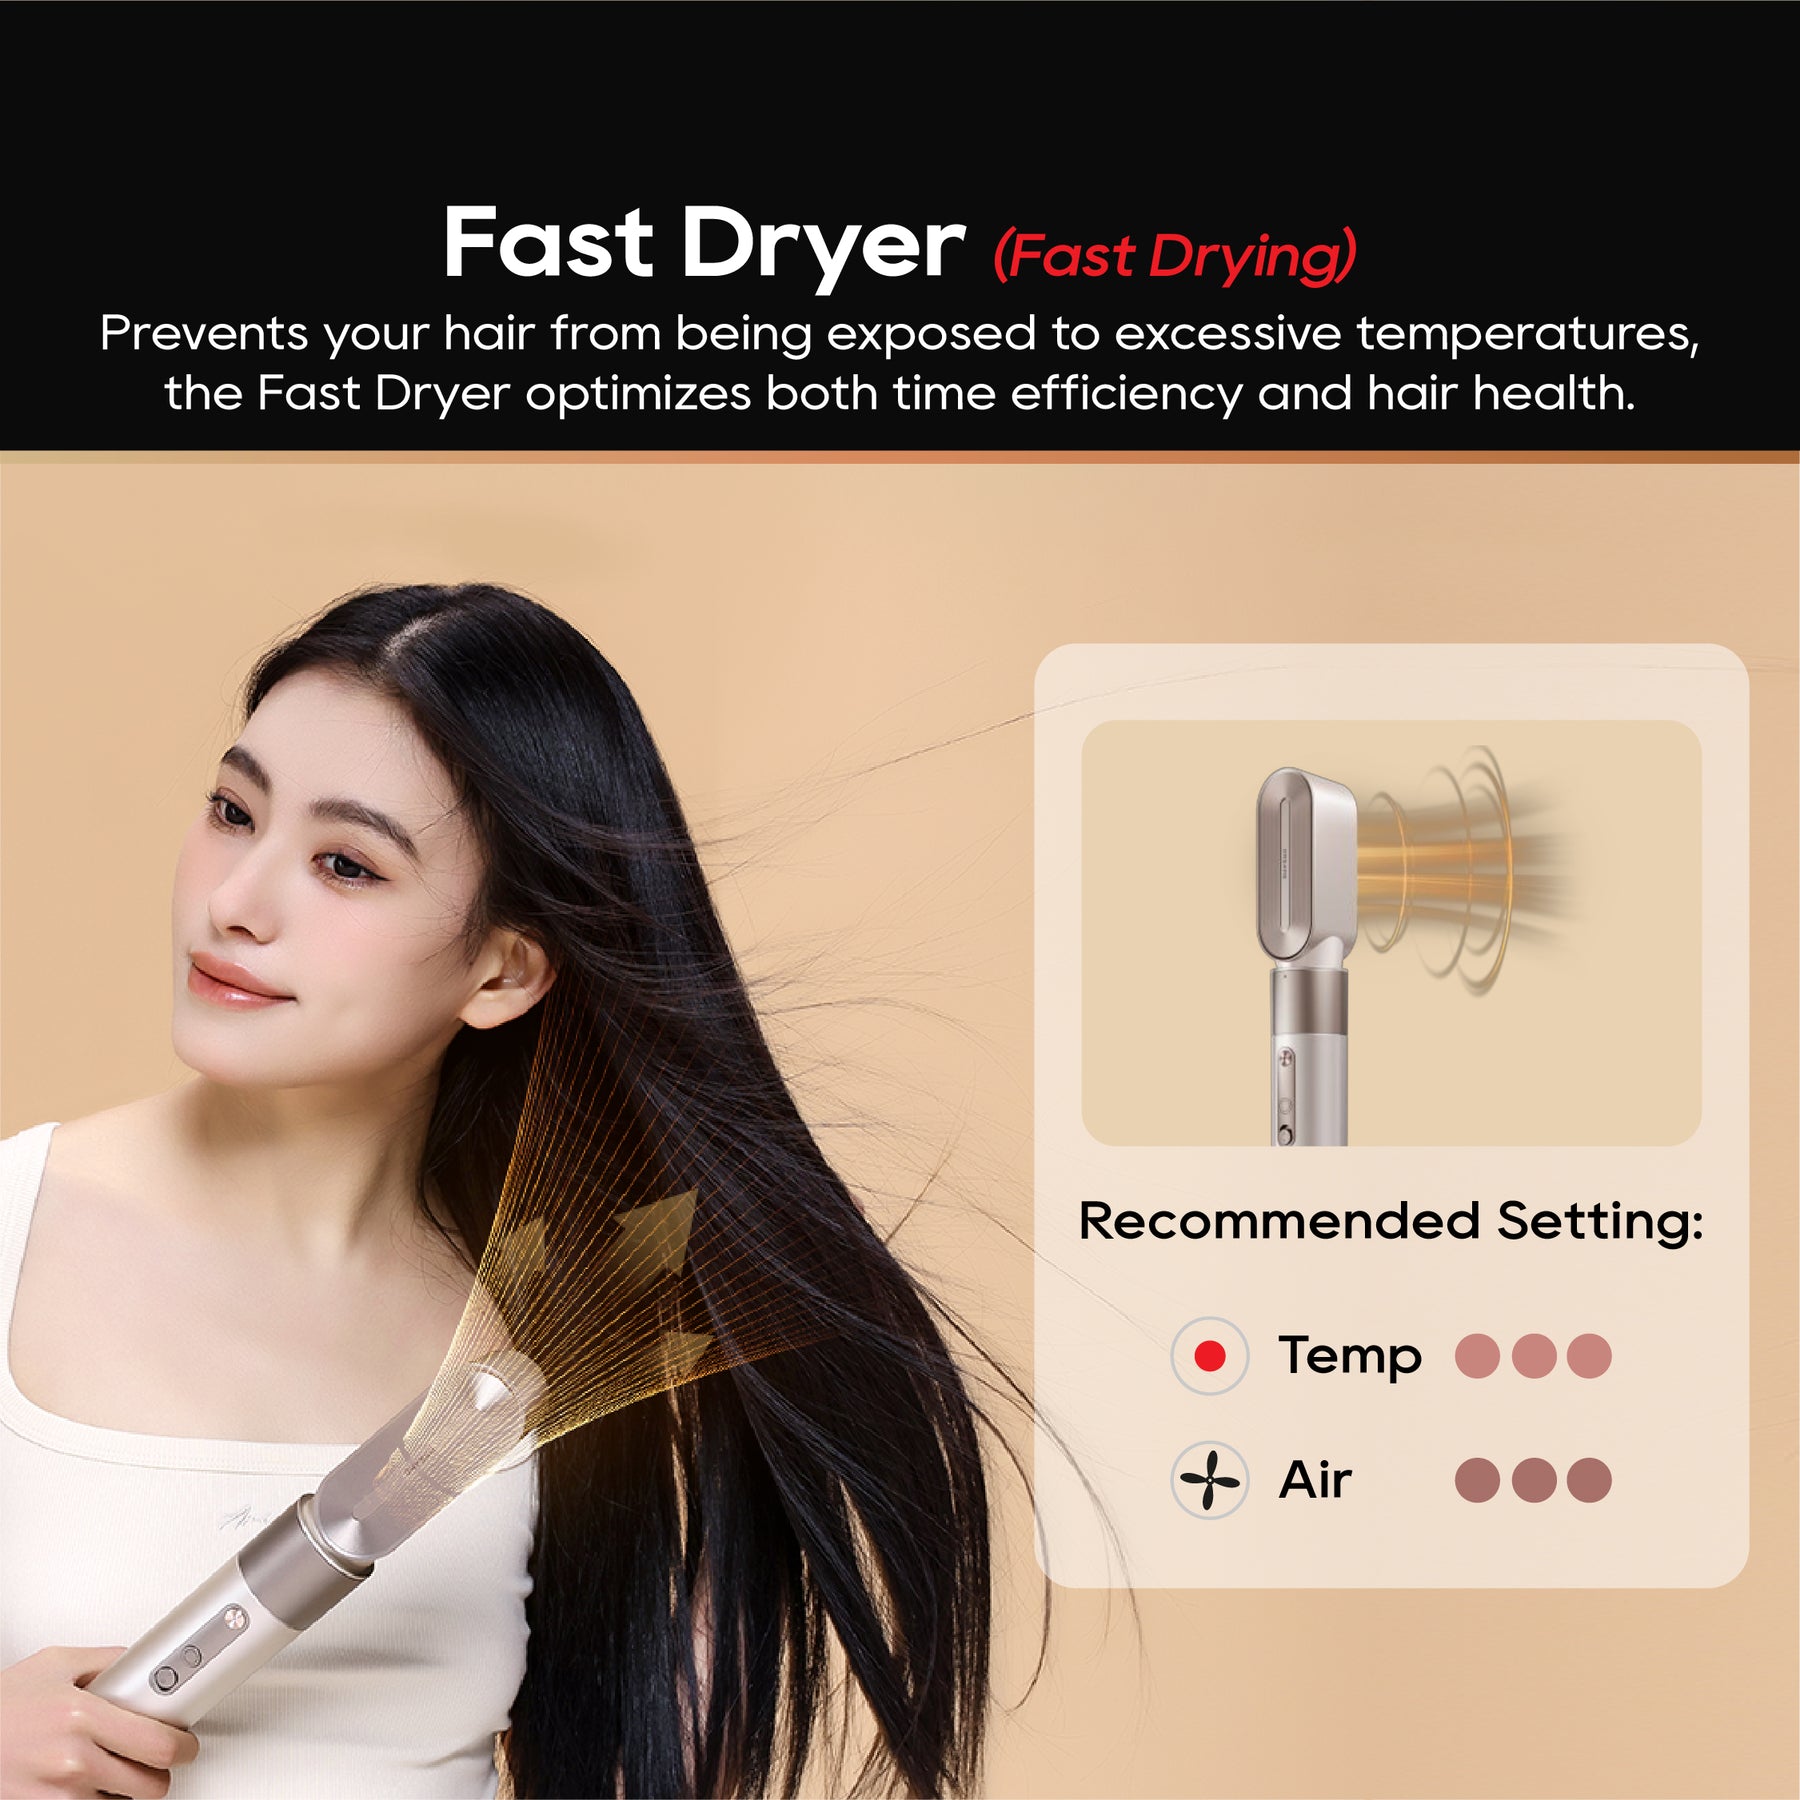 Dreame AirStyle High-Speed Styler